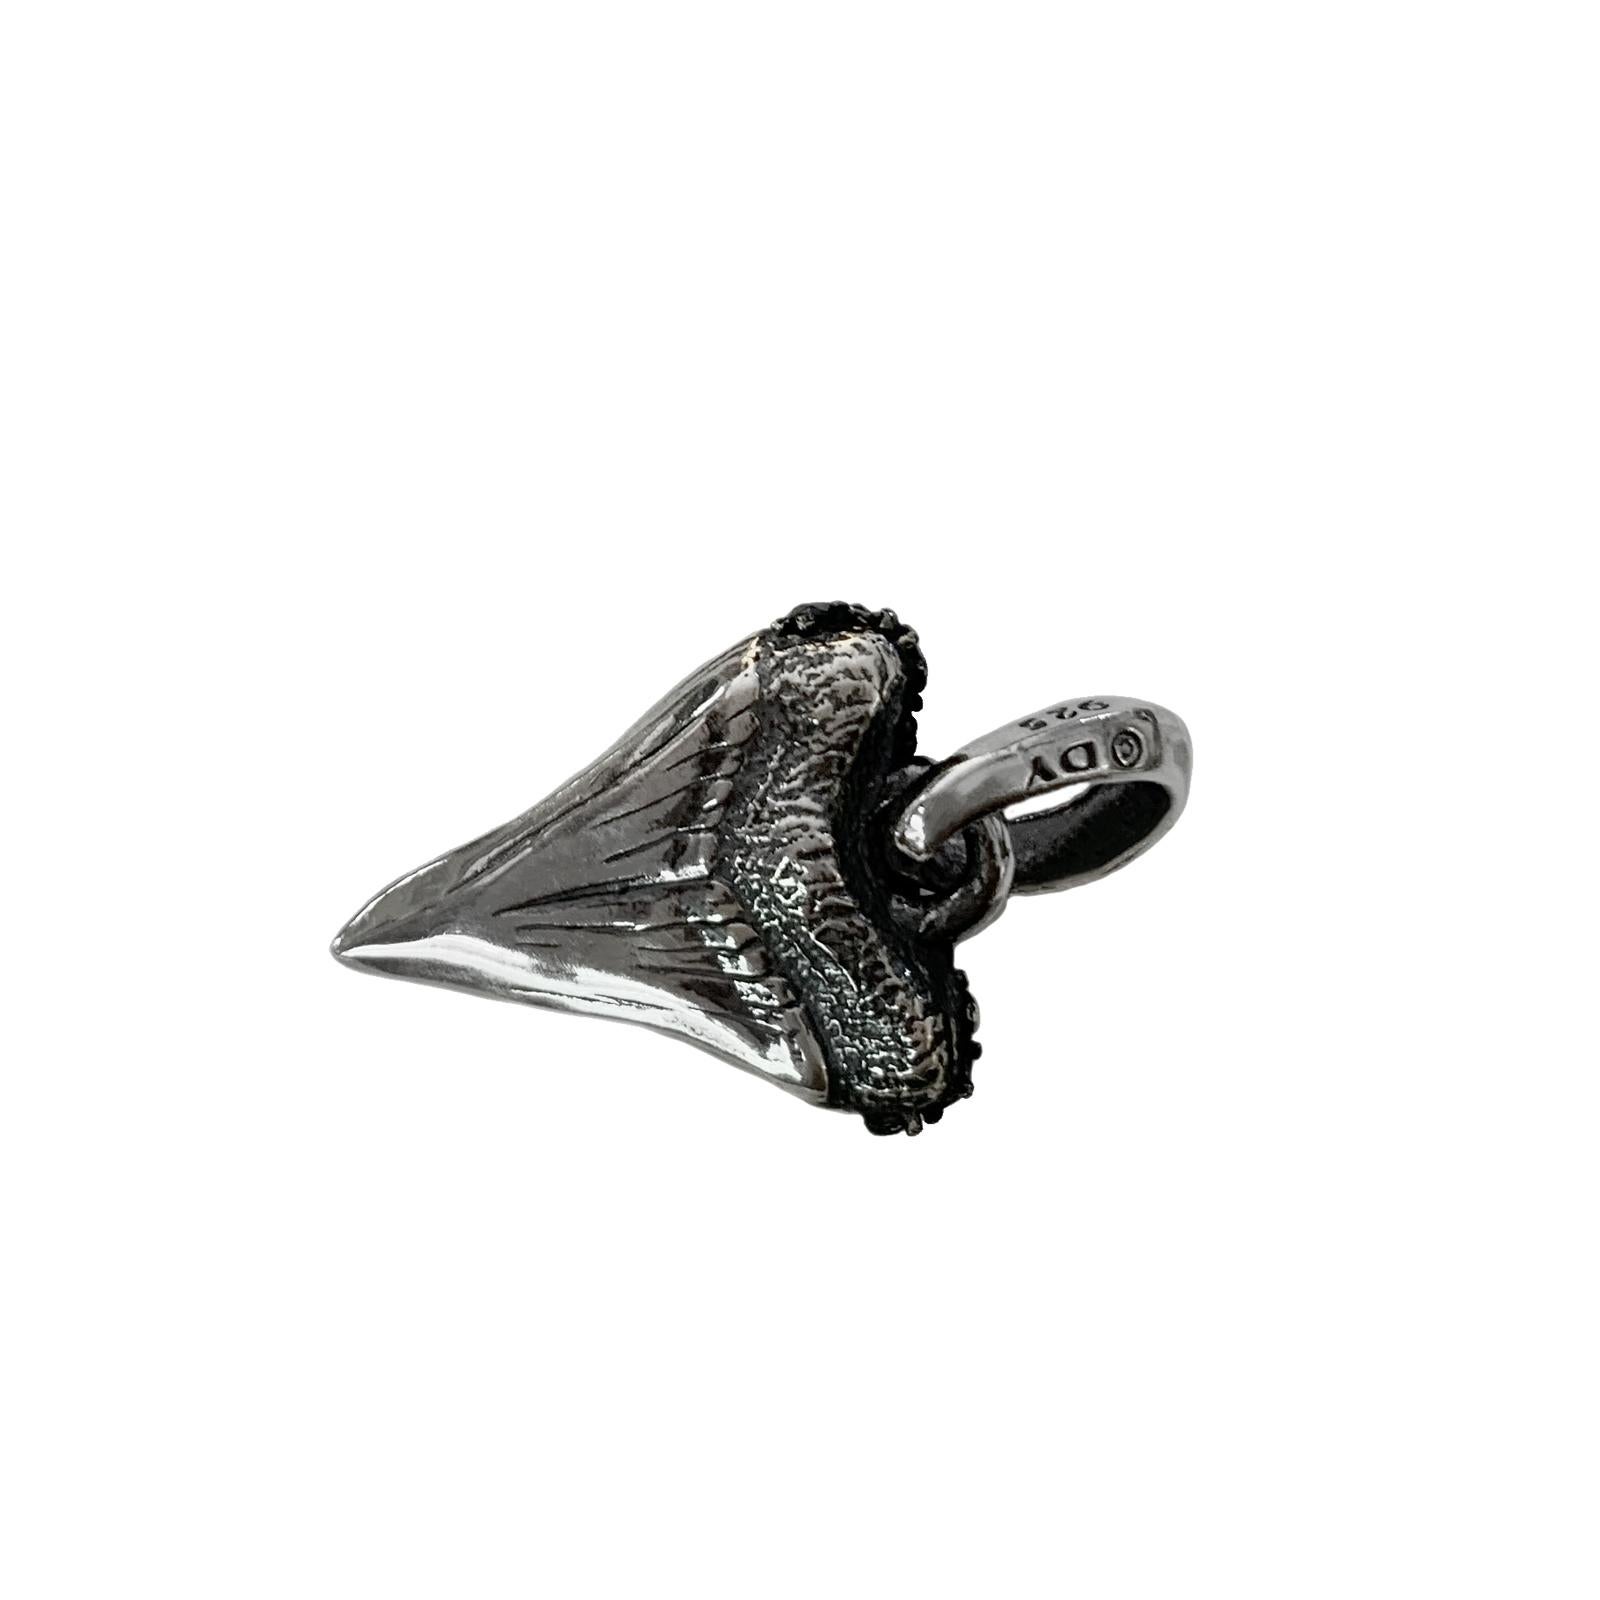 DAVID YURMAN AMULETS SHARK TOOTH PENDANT WITH BLACK DIAMONDS.

-Sterling silver
-Pendant measures about 1” long
-Diamonds: 0.70 ct 
-Does not include chain

*Comes with David Yurman pouch.